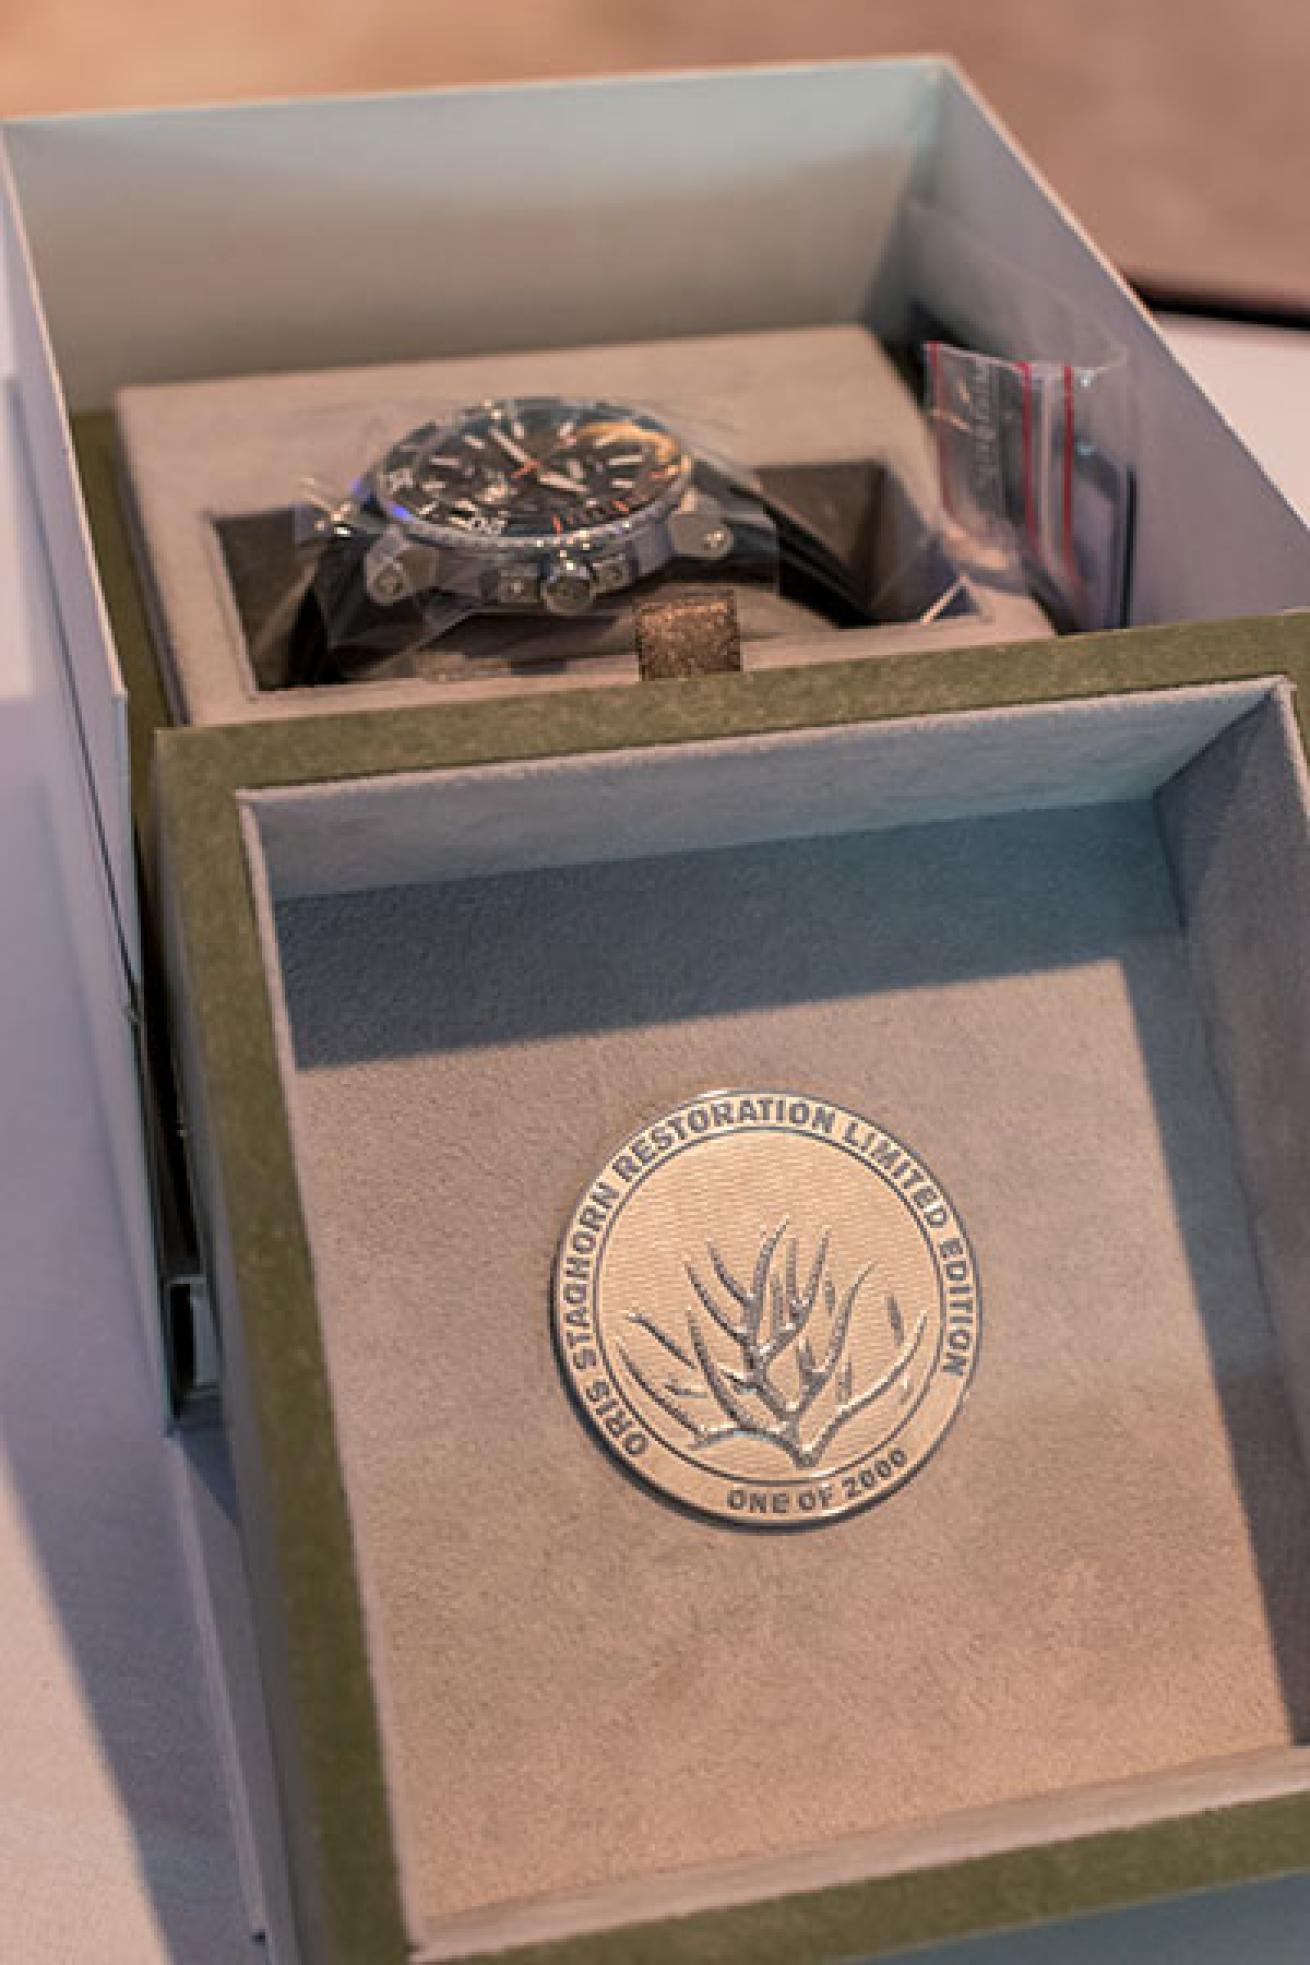 Oris staghorn watch and commemorative medal